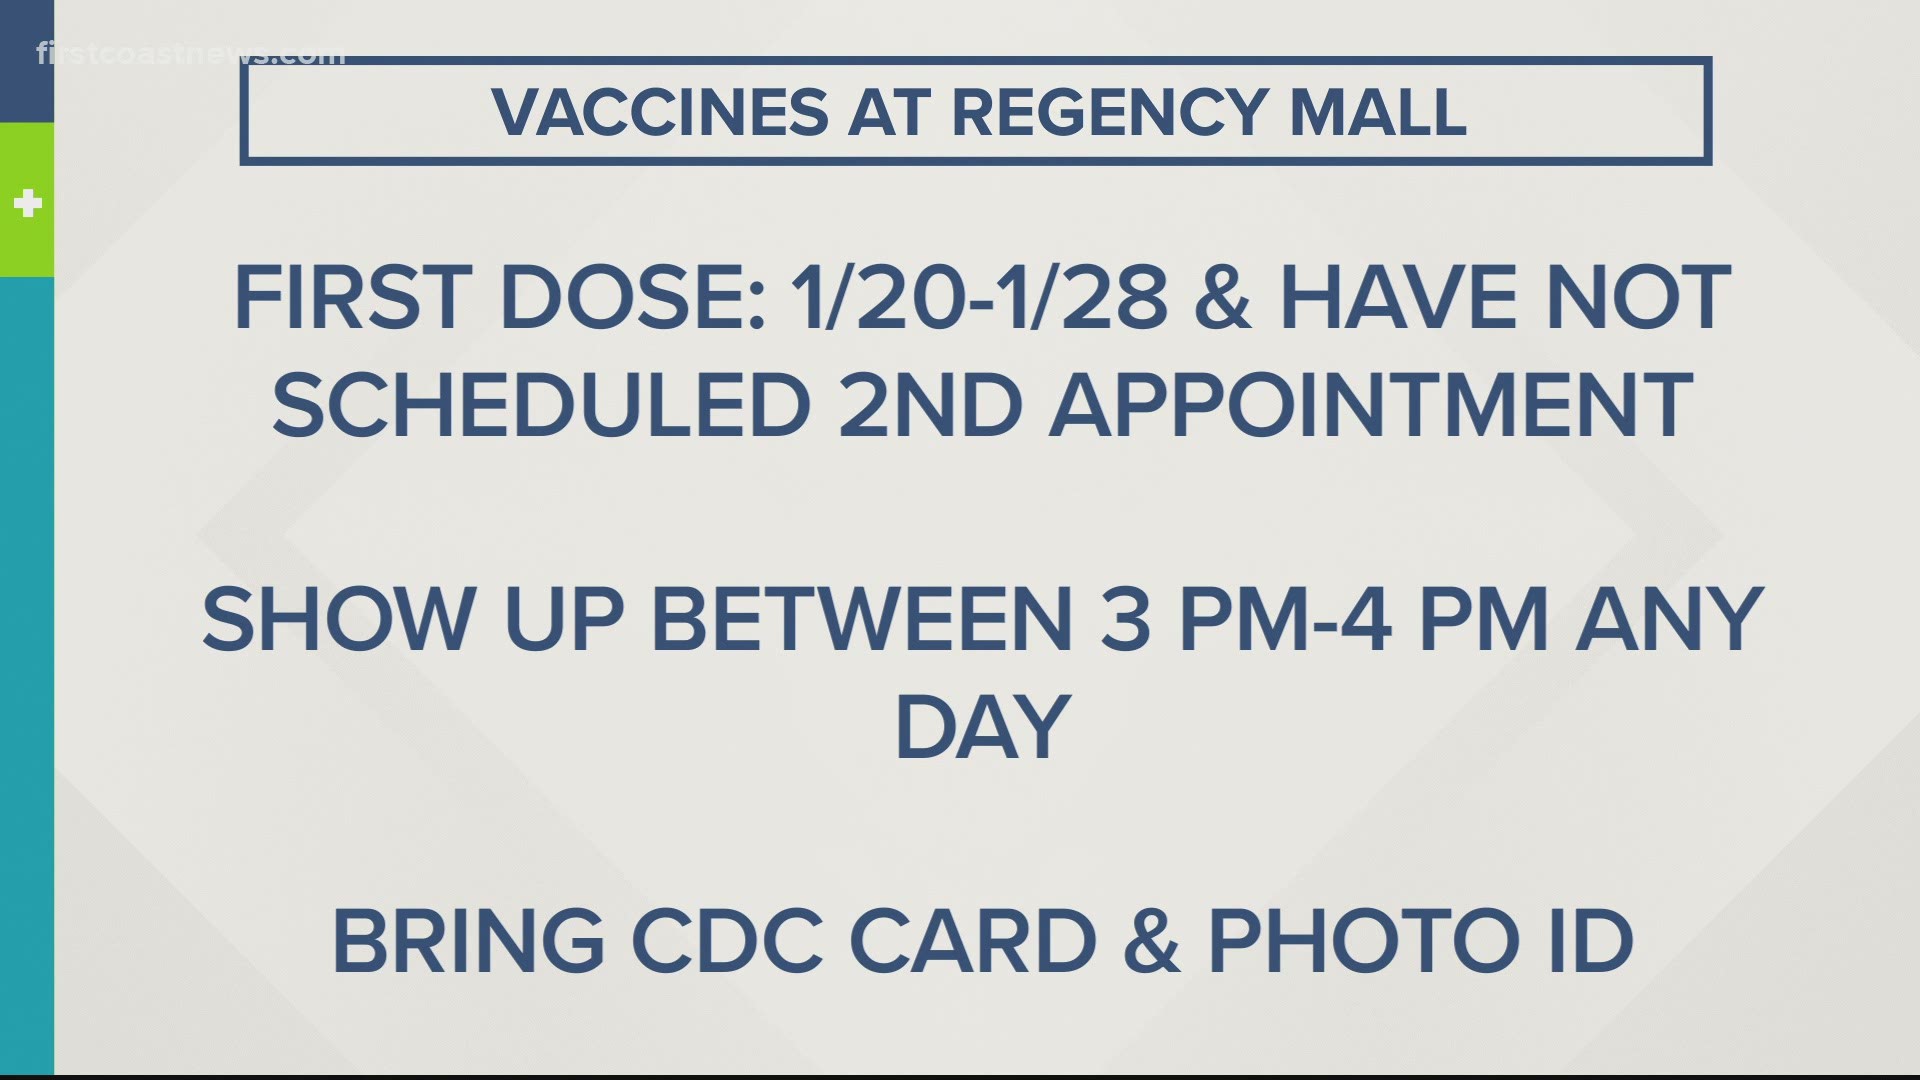 You can show up between 3 p.m. and 4 p.m. any day without an appointment to get your second dose. You still need your CDC card and a photo ID.